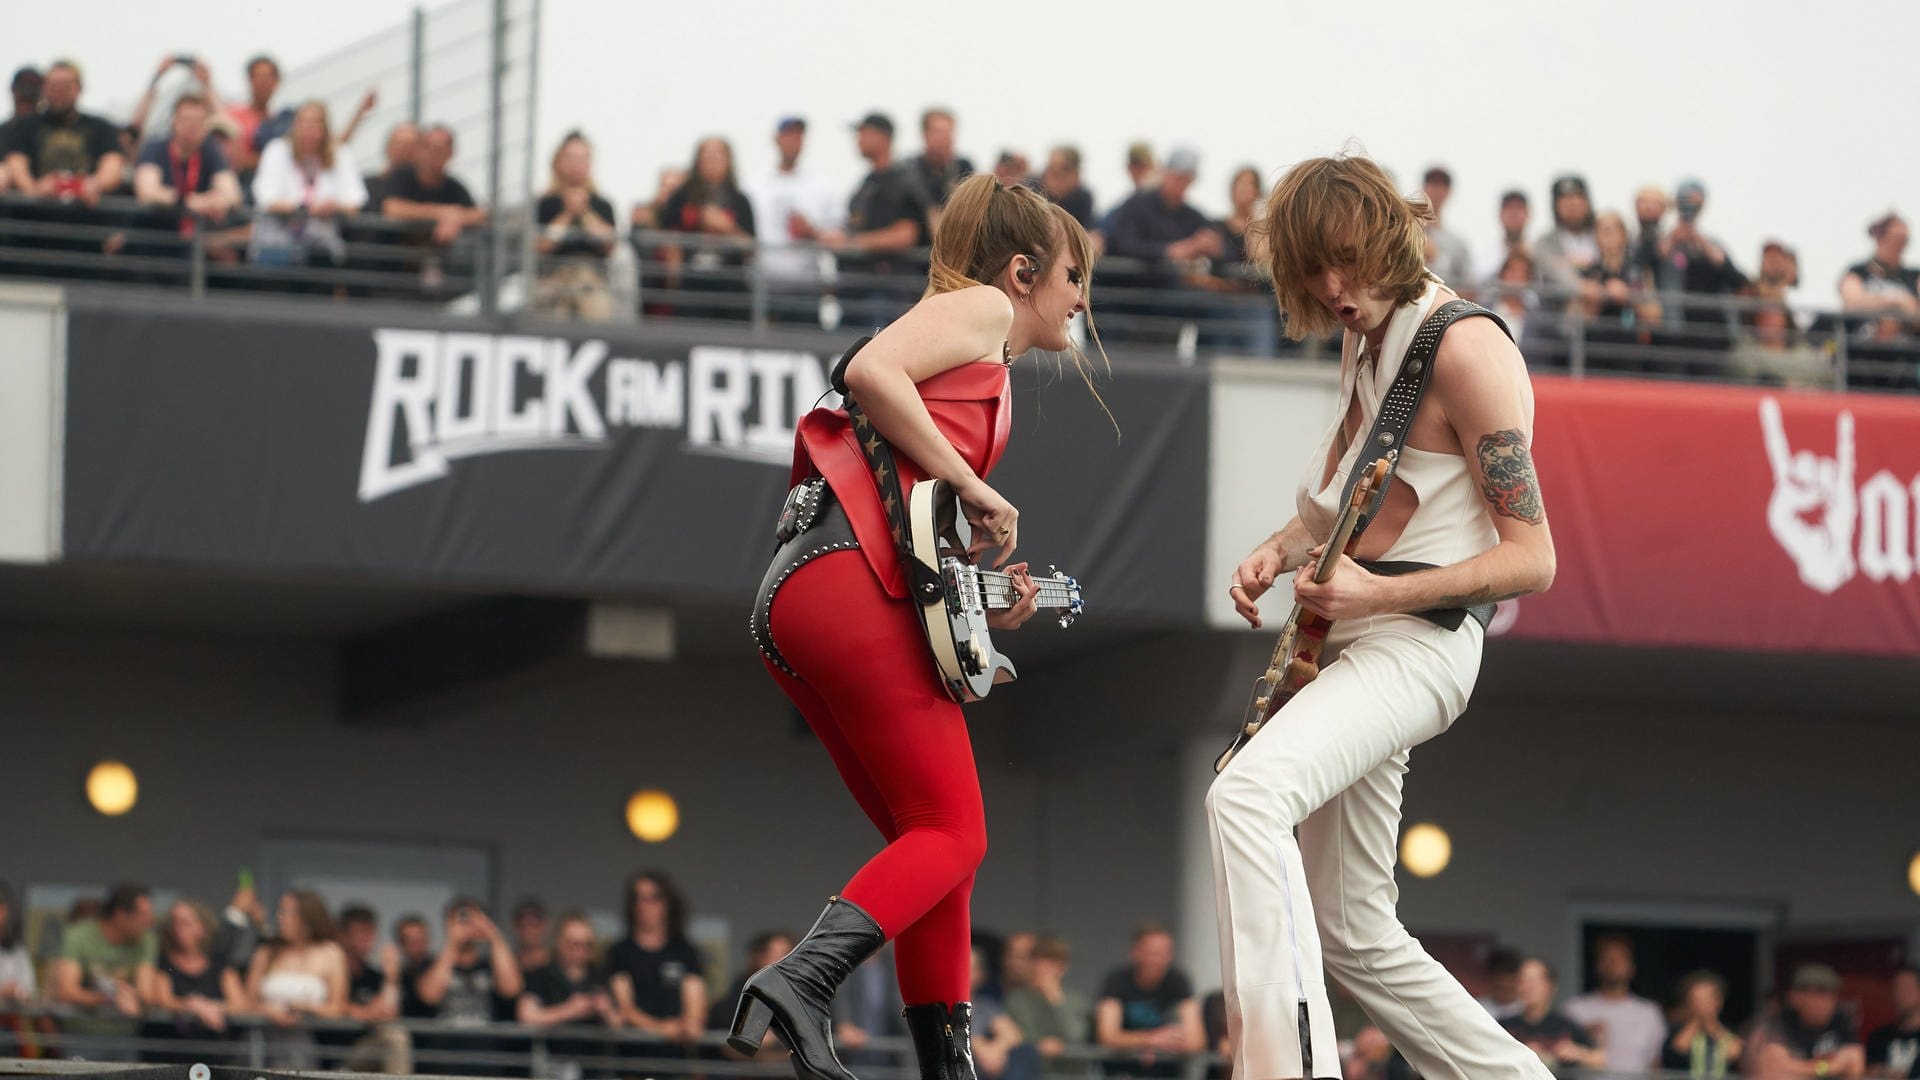 Rock am Ring 2022 (Foto: picture-alliance / Reportdienste, picture alliance/dpa | Thomas Frey)